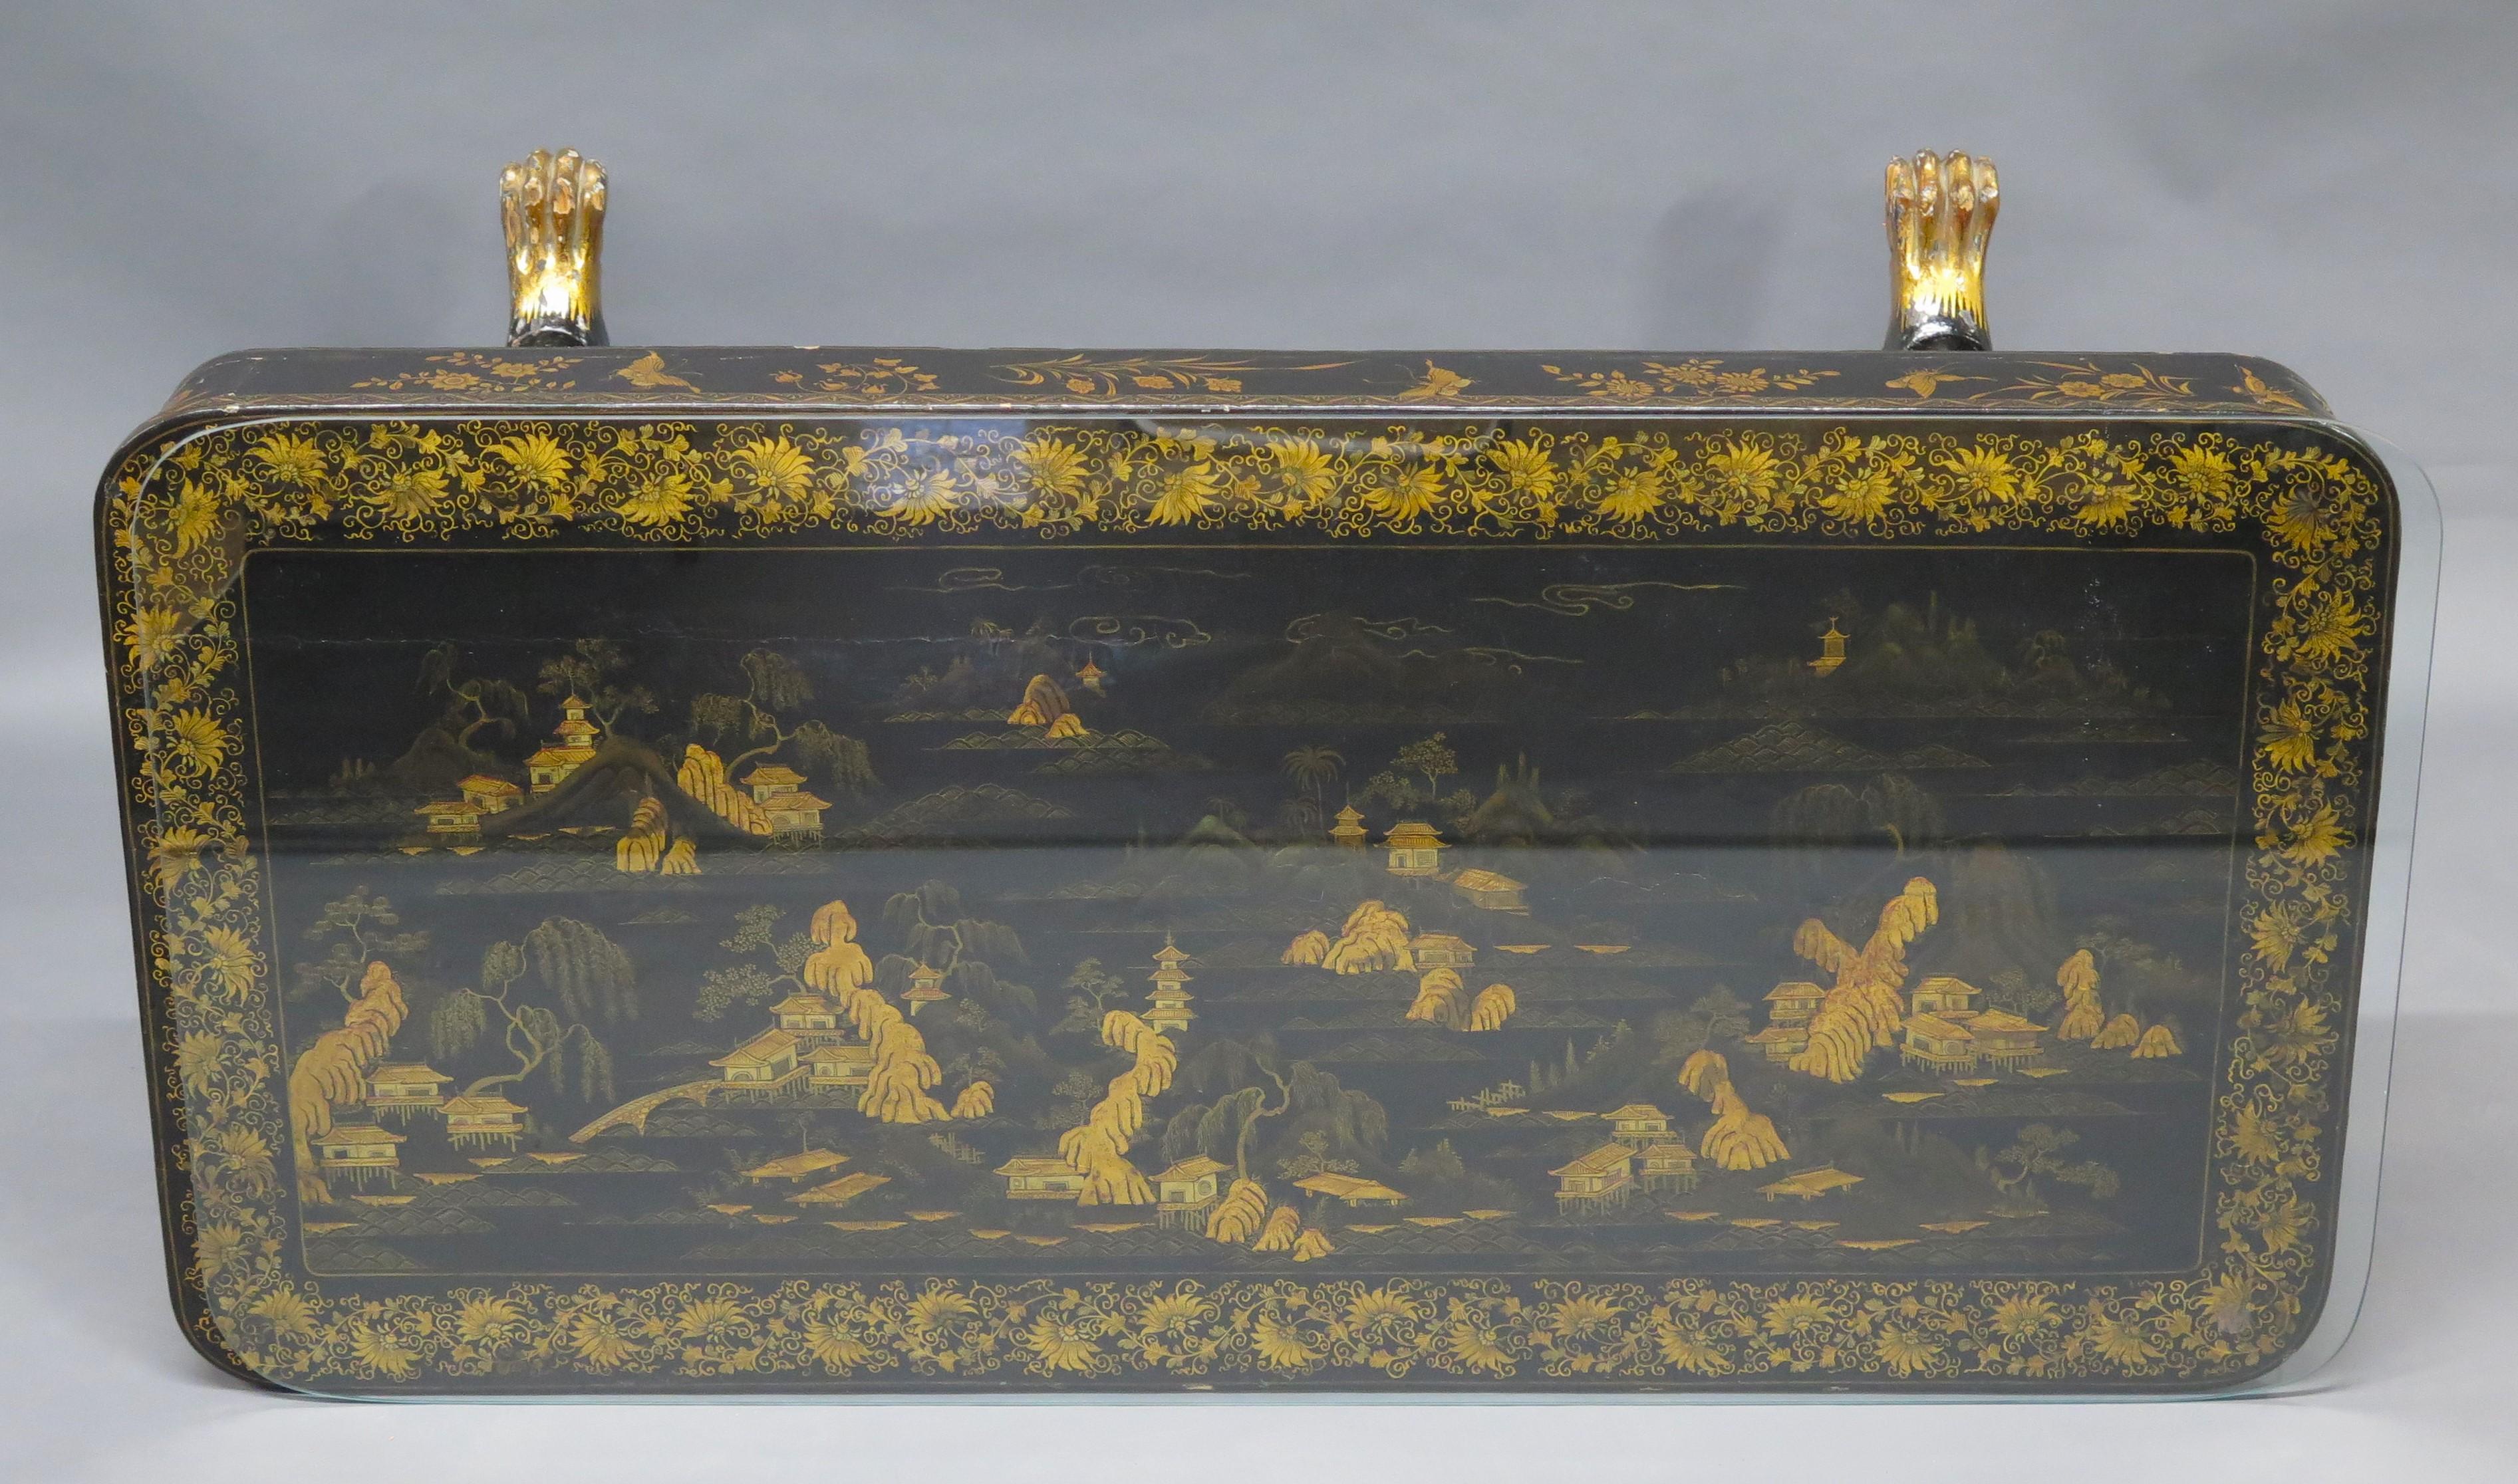 A Chinese Export Black and Gold Lacquer Desk For Sale 4